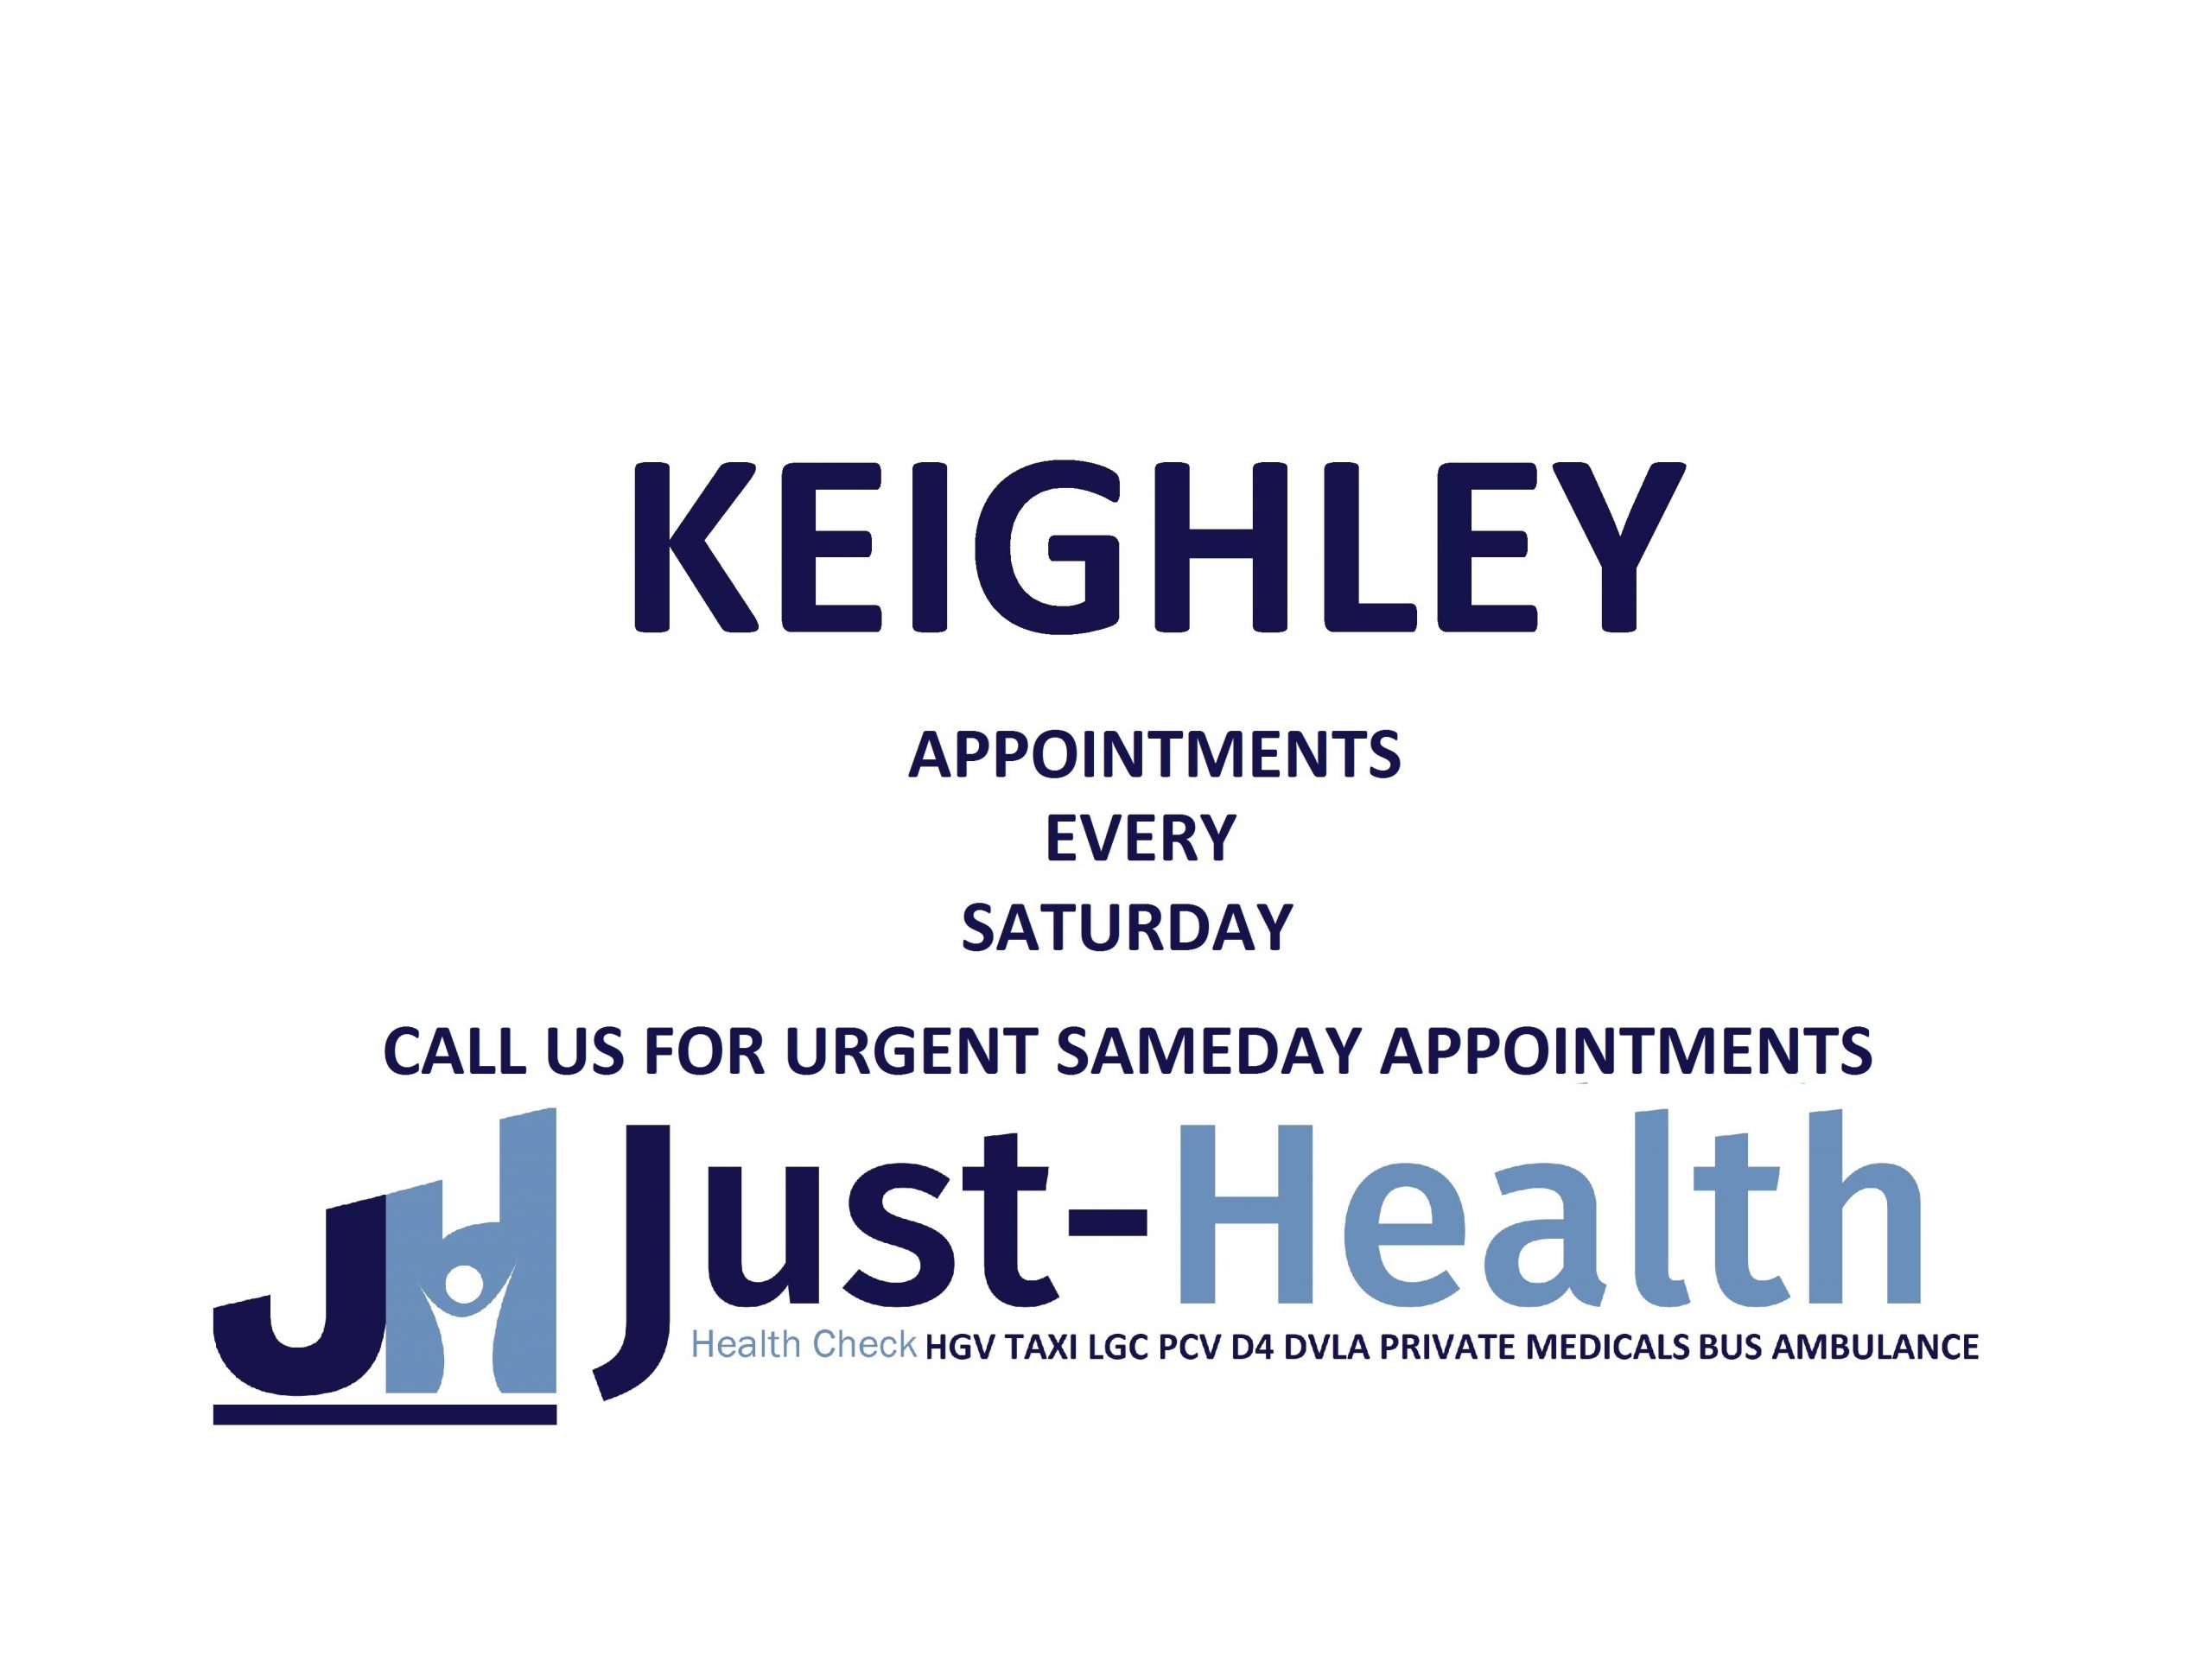 hgv medical KEIGHLEY just health cross hills yorkshire